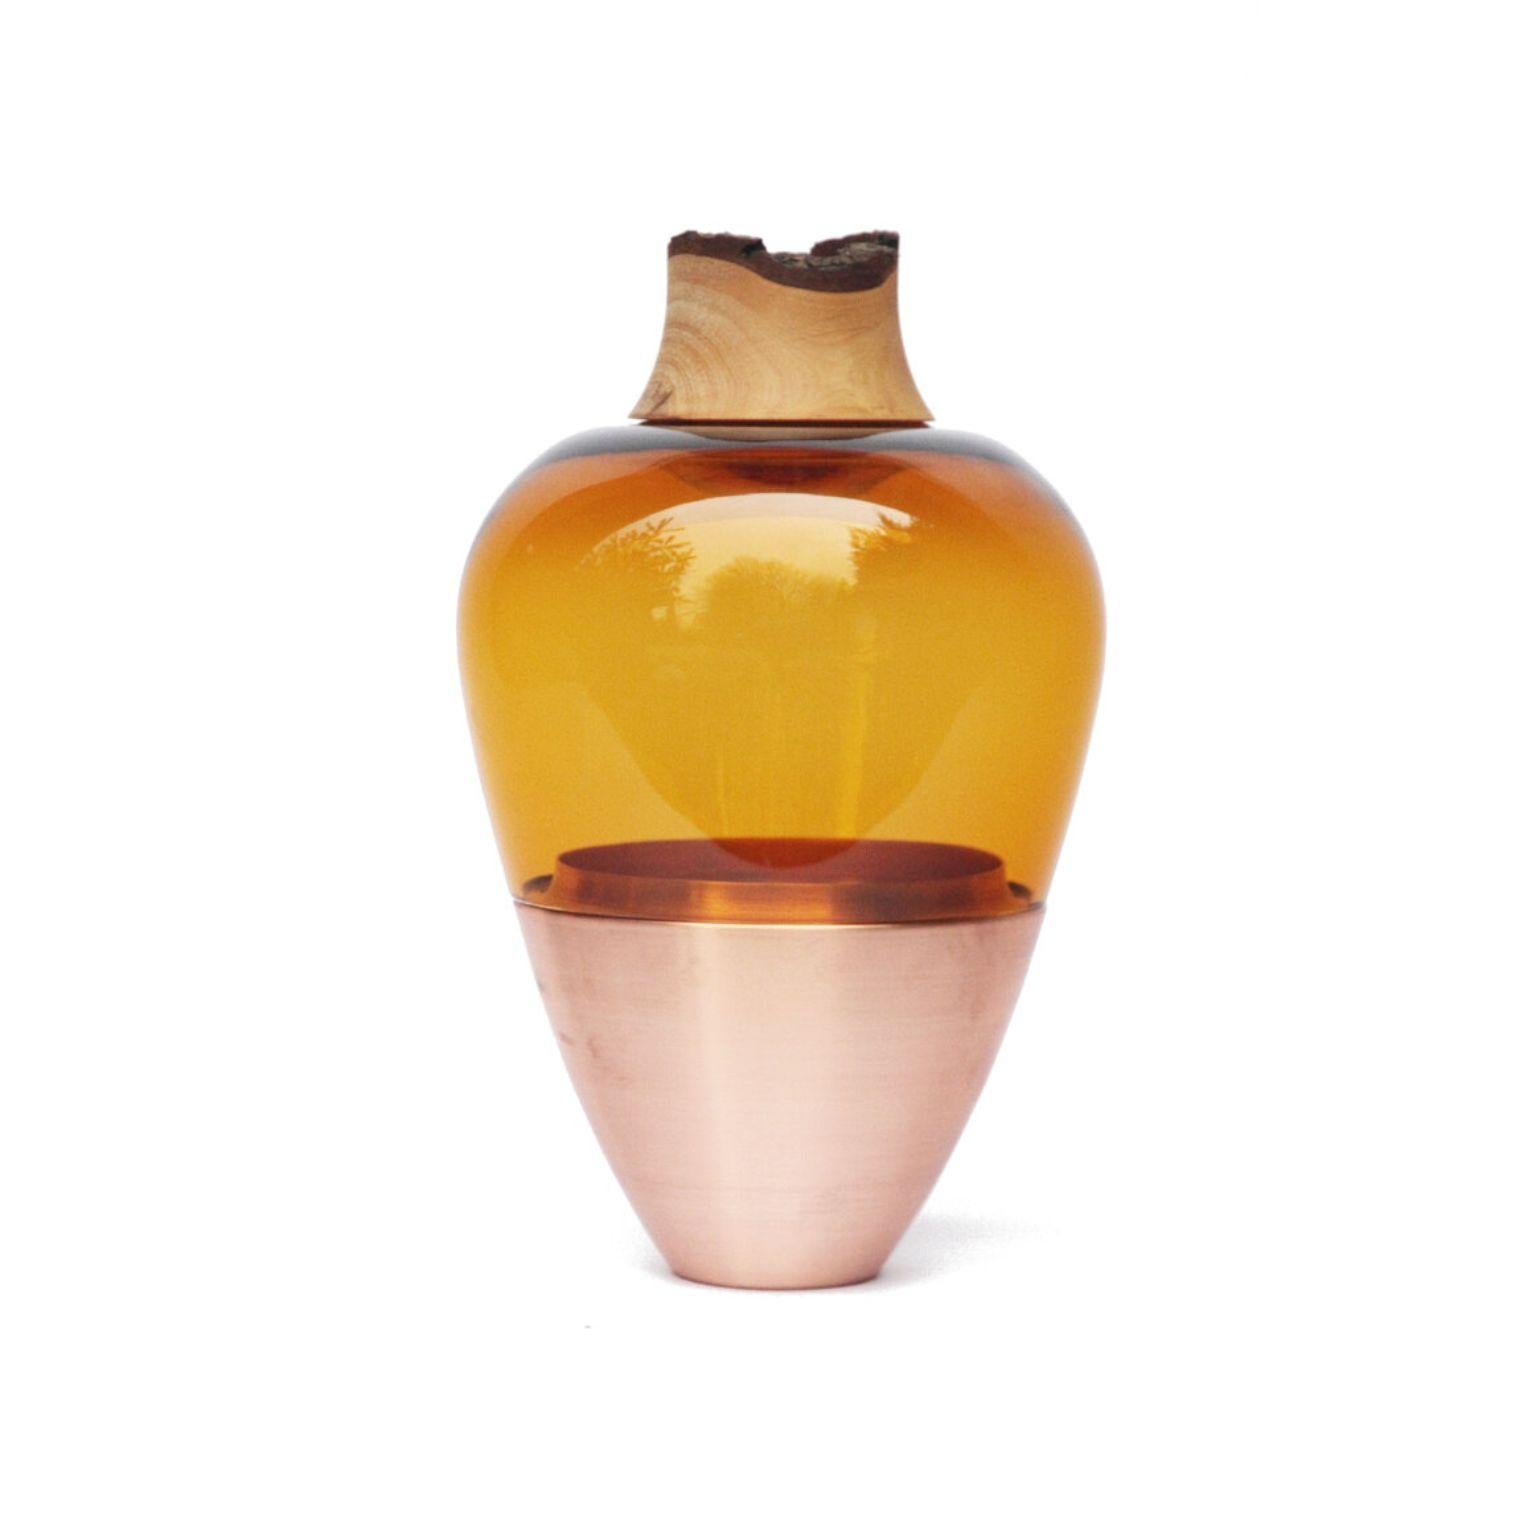 Amber and copper sculpted blown glass, Pia Wüstenberg
Dimensions: Height 20 x diameter 38cm
Materials: Hand blown glass, brass

Pia Wüstenberg, Utopia
Pia Wüstenberg is a creative with a passion for materials and craft. She graduated from the